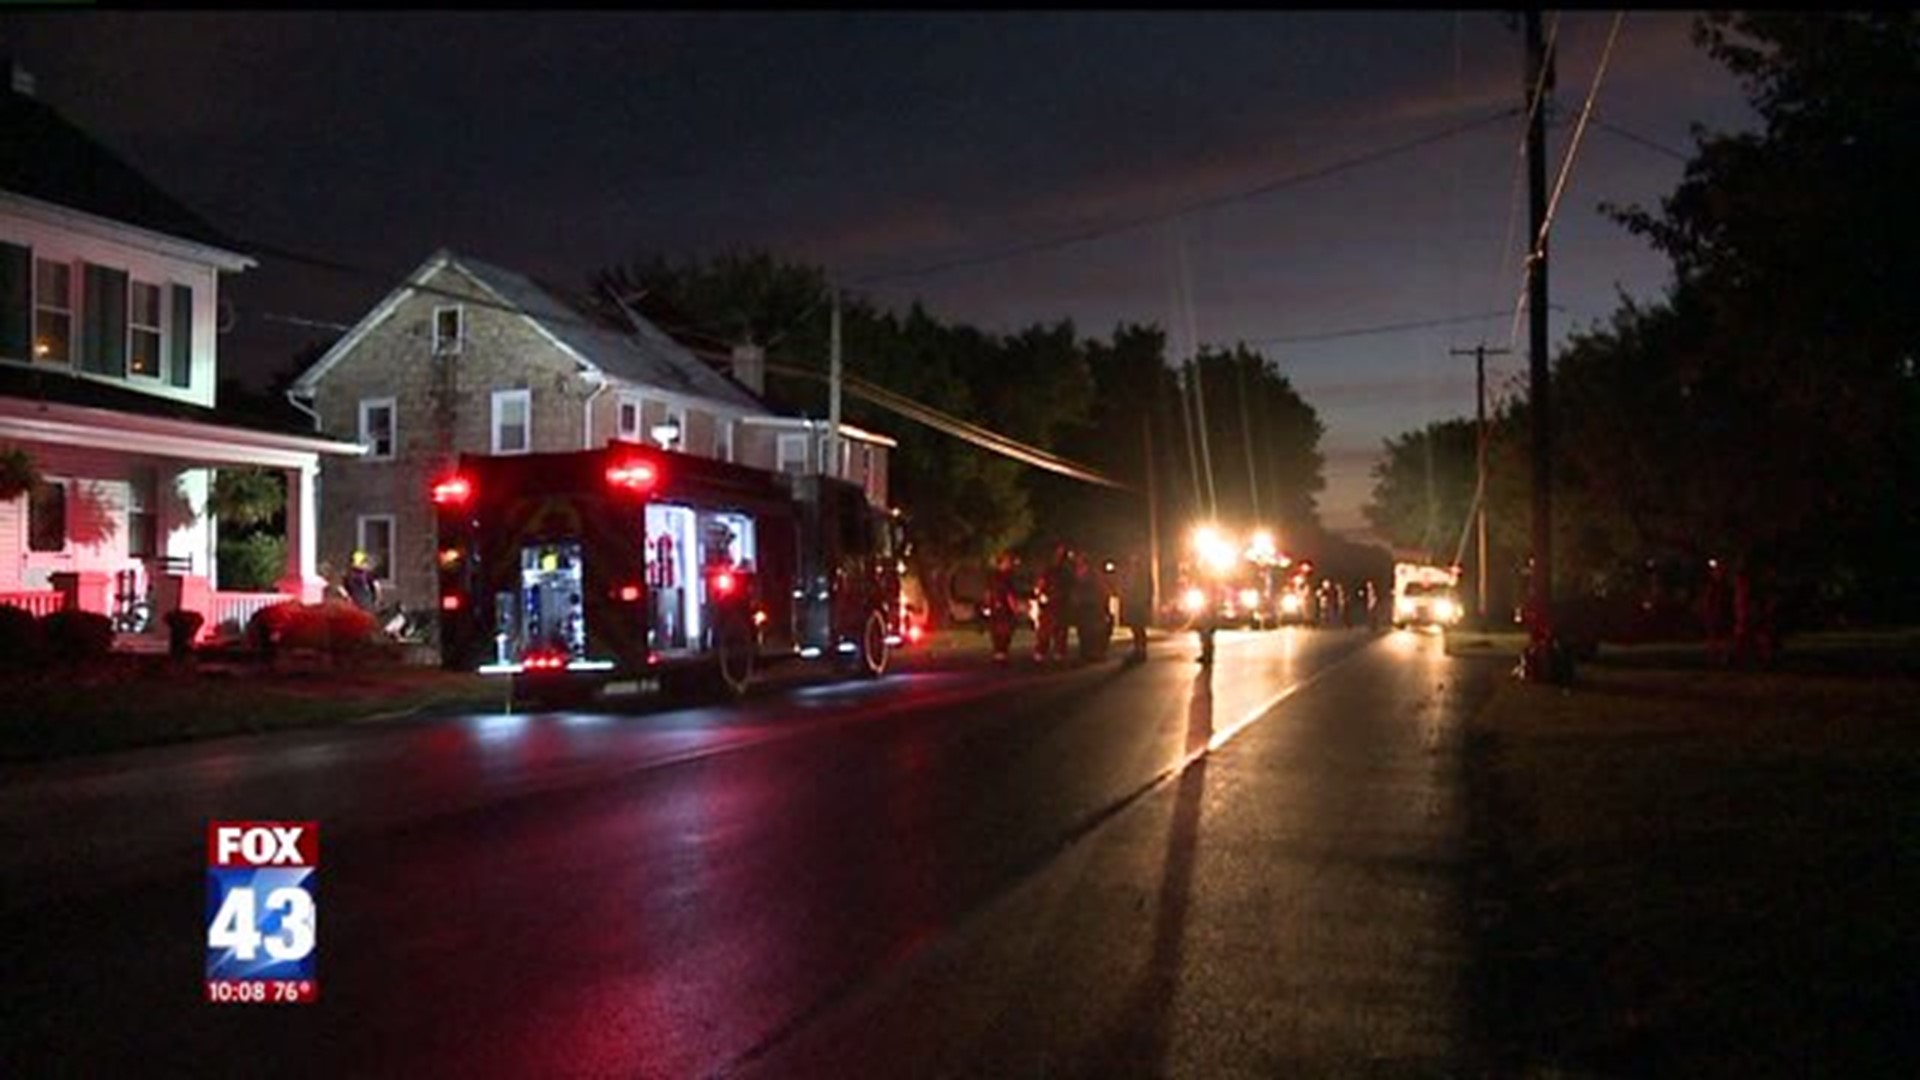 Lightning Causes House Fire